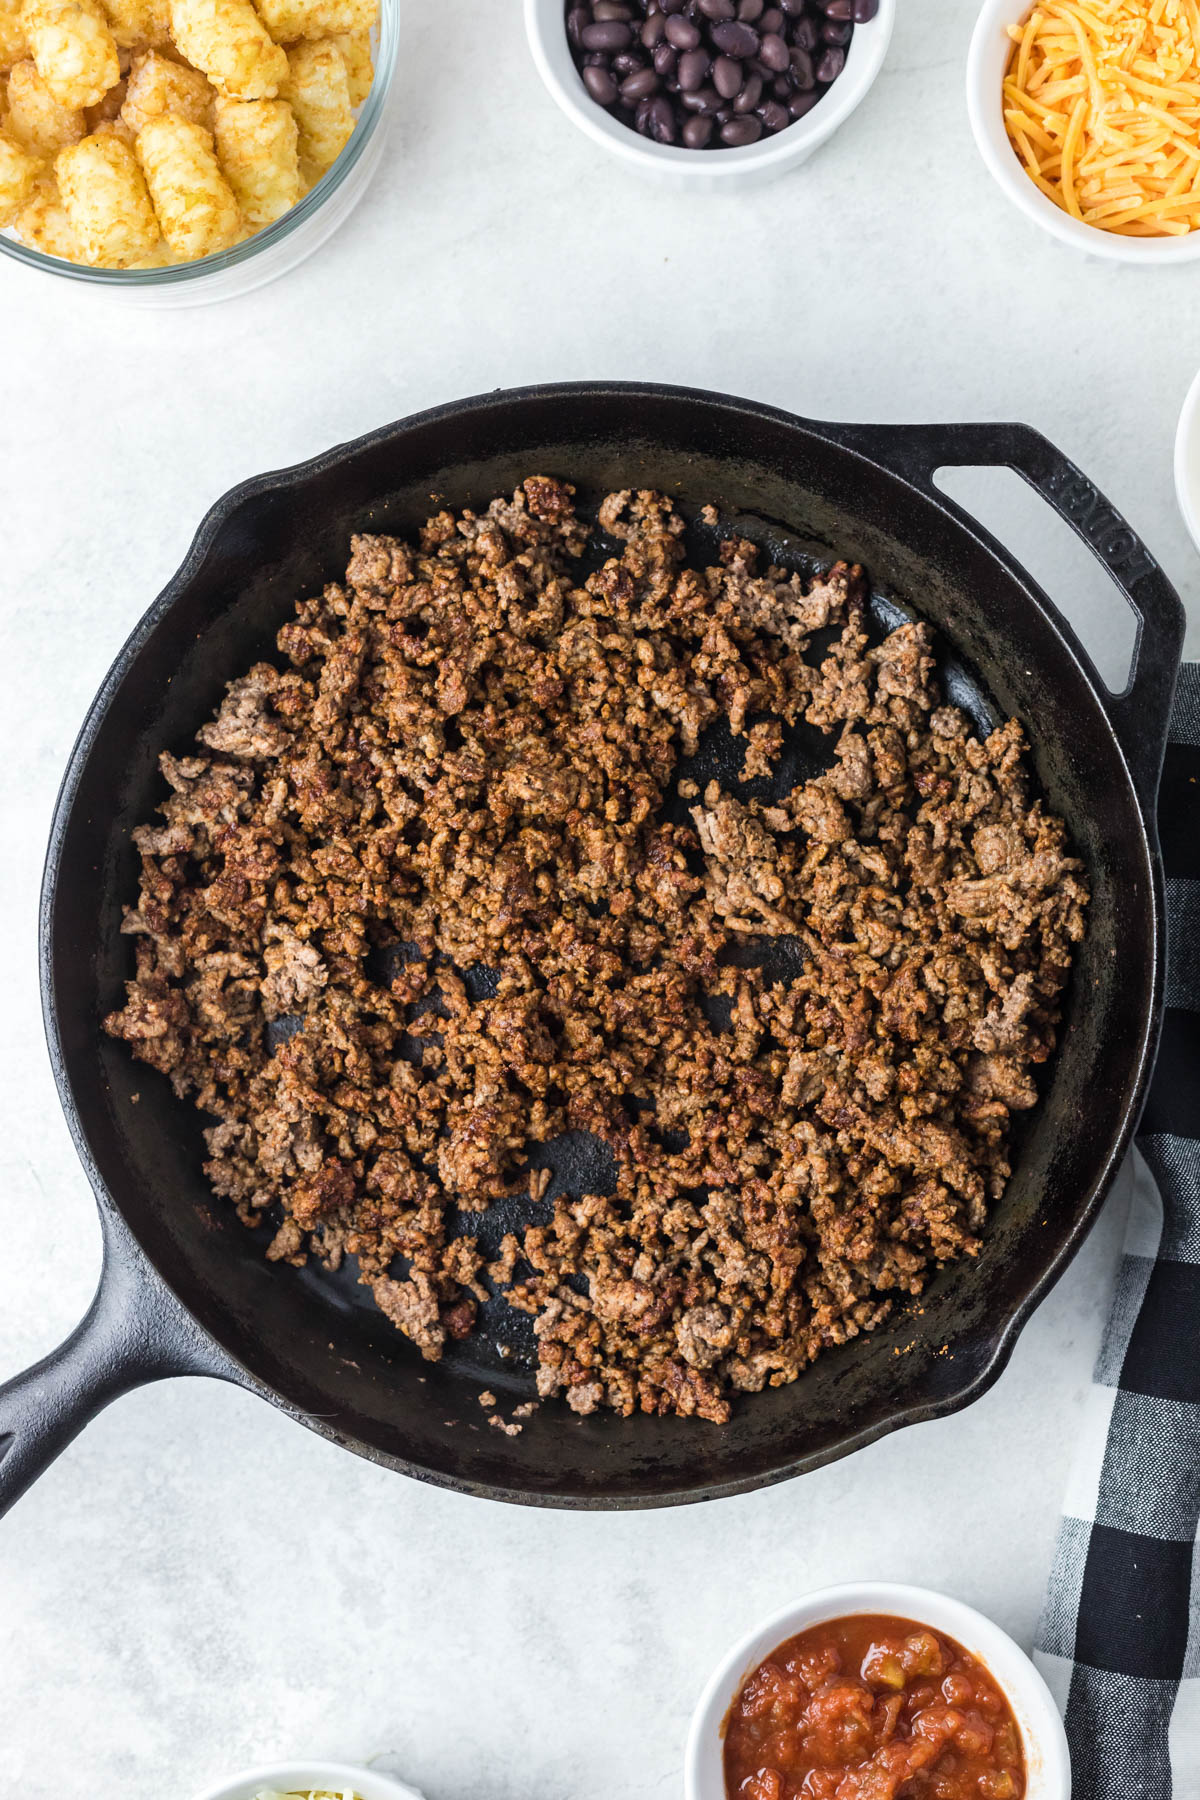 Ground beef is displayed already browned in a black skillet.